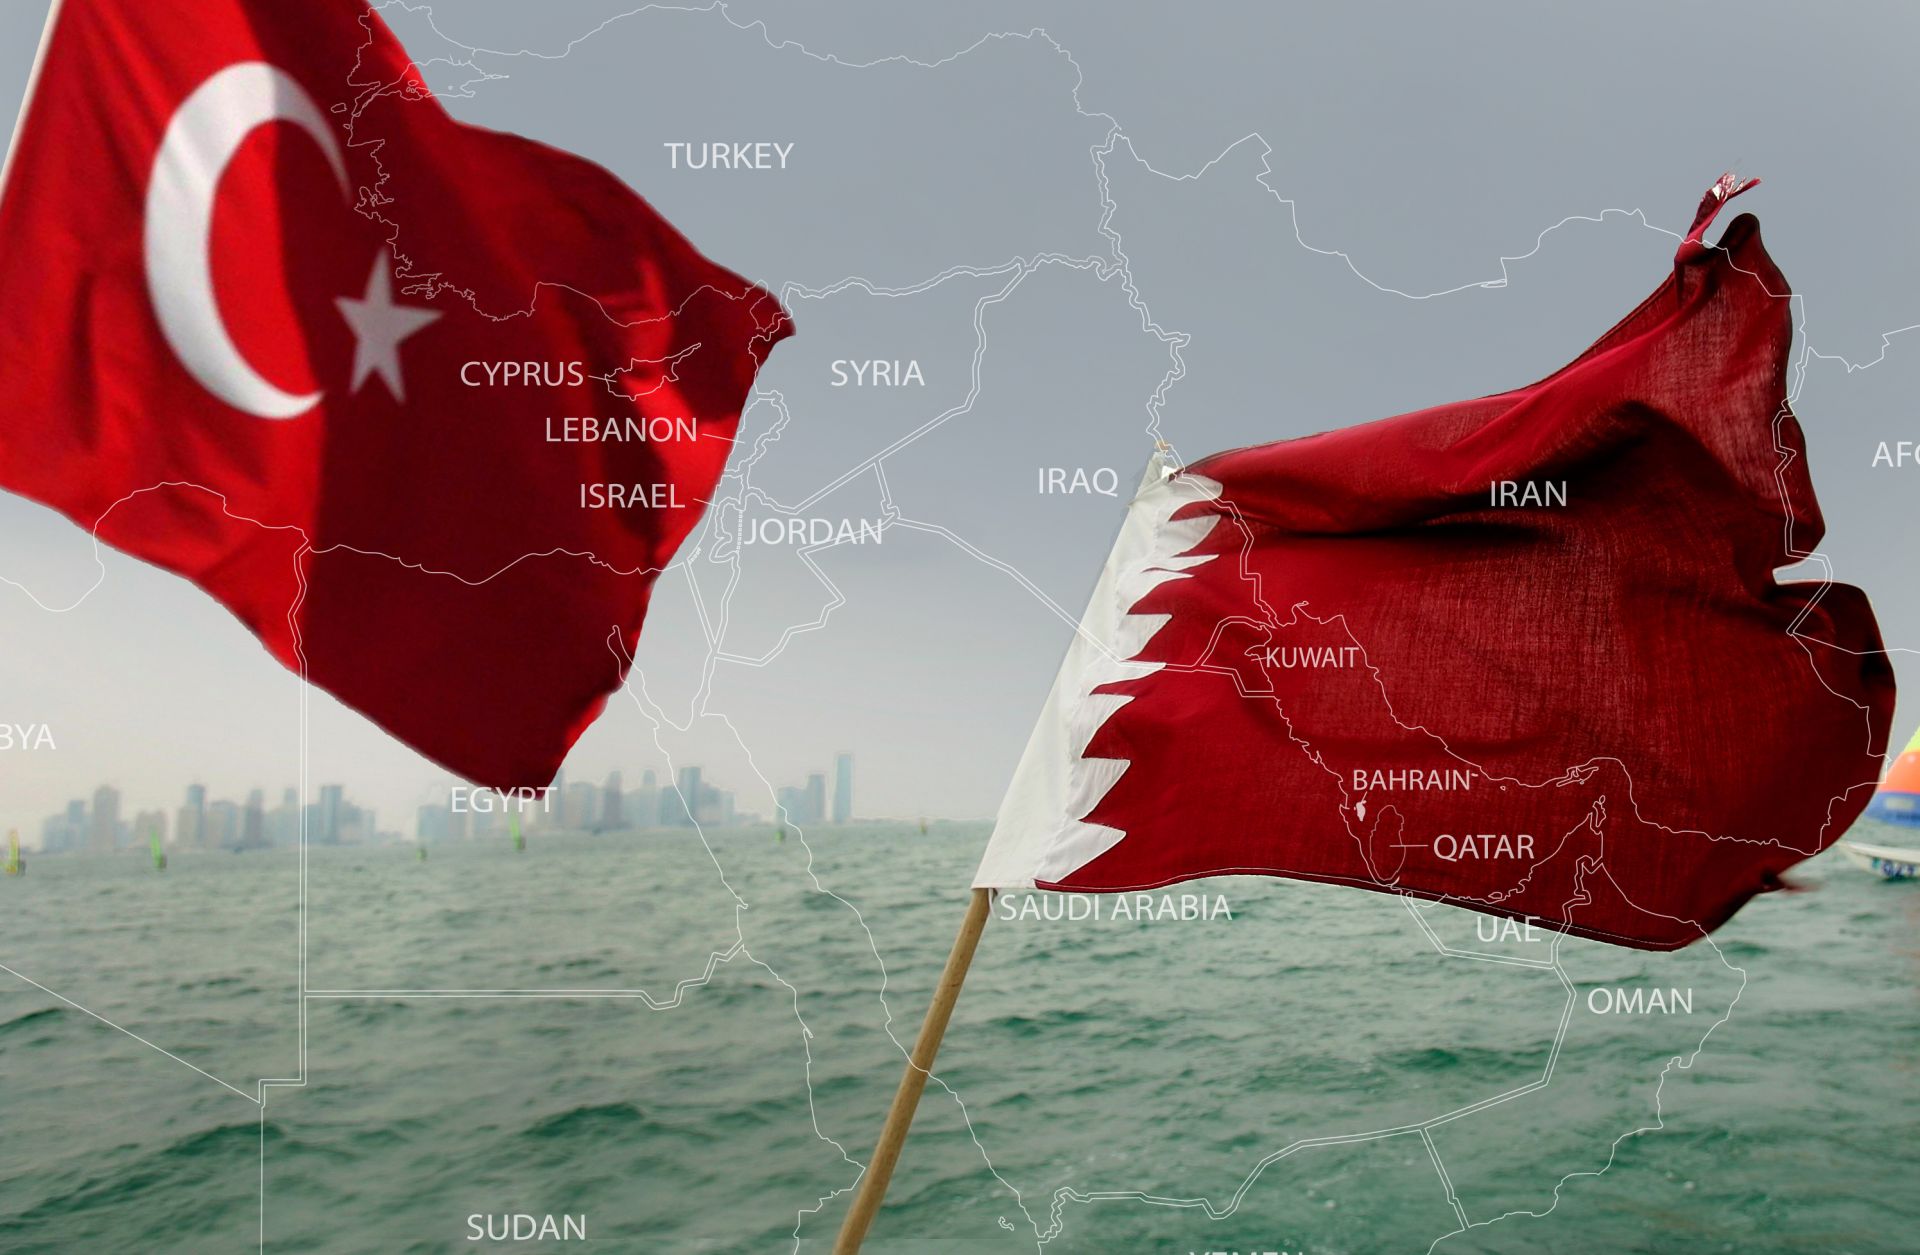 The diplomatic break between Qatar and its Gulf neighbors threatens to pull Turkey into another Middle Eastern conflict. 